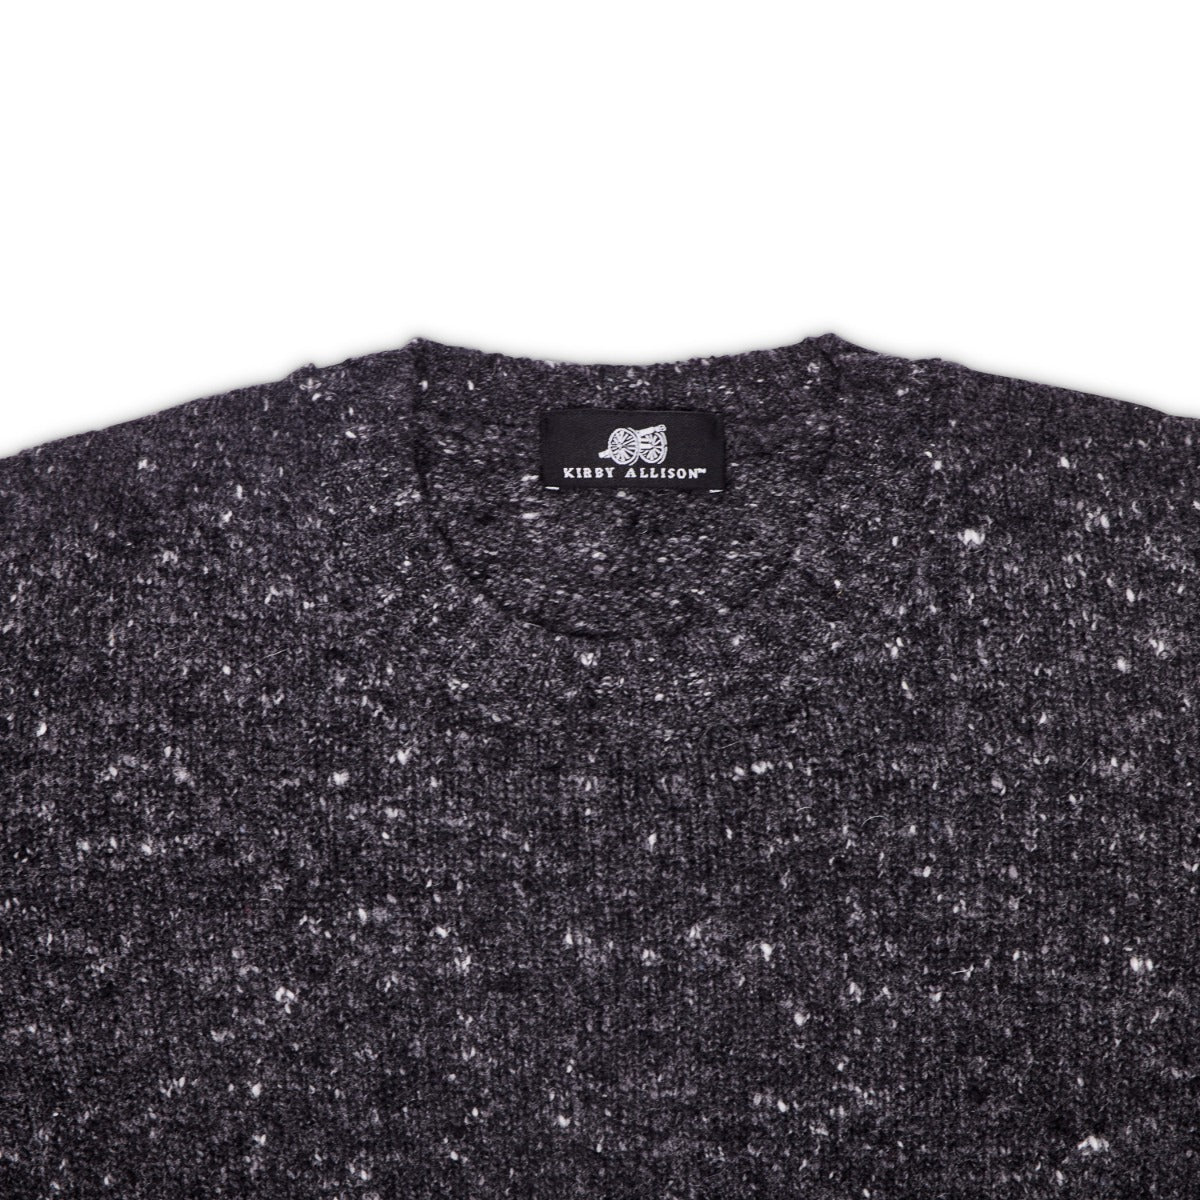 A Sovereign Grade Grey Donegal Crew Neck Sweater from KirbyAllison.com with white speckles on it.